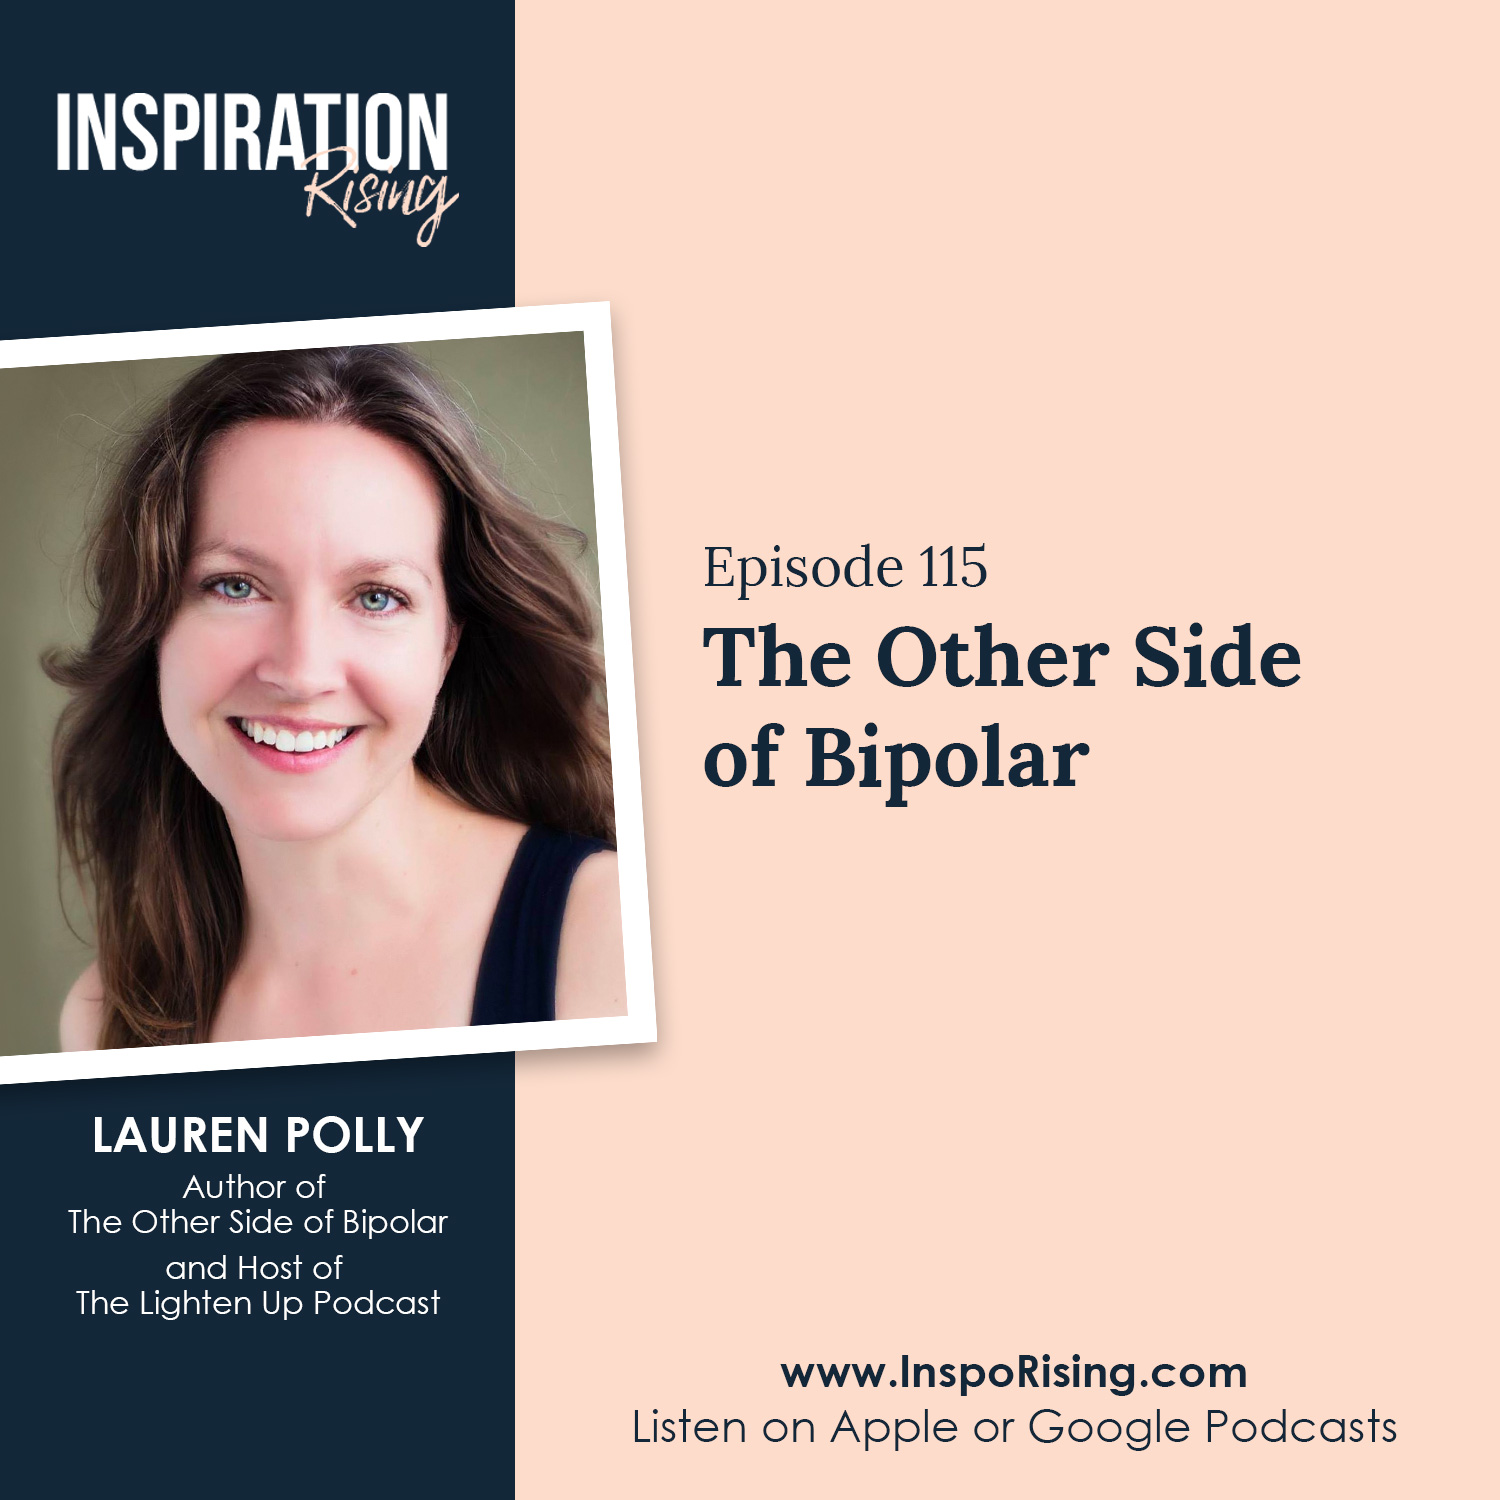 Lauren Polly - The Other Side of Bipolar